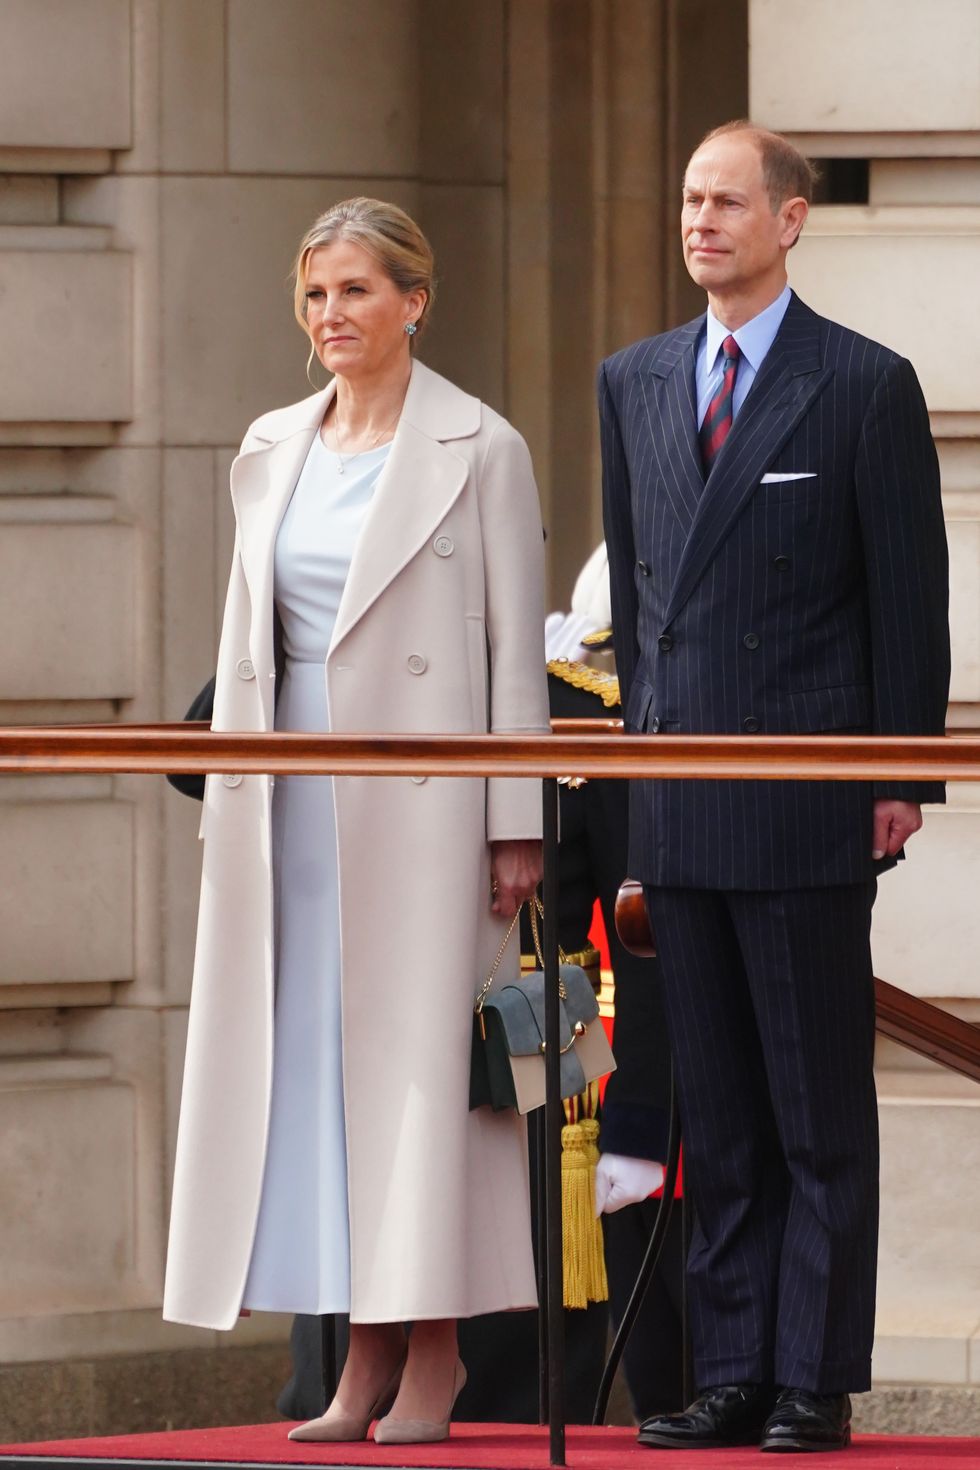 london, england april 8 sophie, duchess of edinburgh and prince edward, duke of edinburgh on behalf of king charles iii, watch the changing of the guard at buckingham palace with frances gendarmeries garde republicaine taking part to commemorate the 120th anniversary of the entente cordiale the historic diplomatic agreement between britain and france which laid the groundwork for their collaboration in both world wars on april 8, 2024 in london, england photo by victoria jones poolgetty images